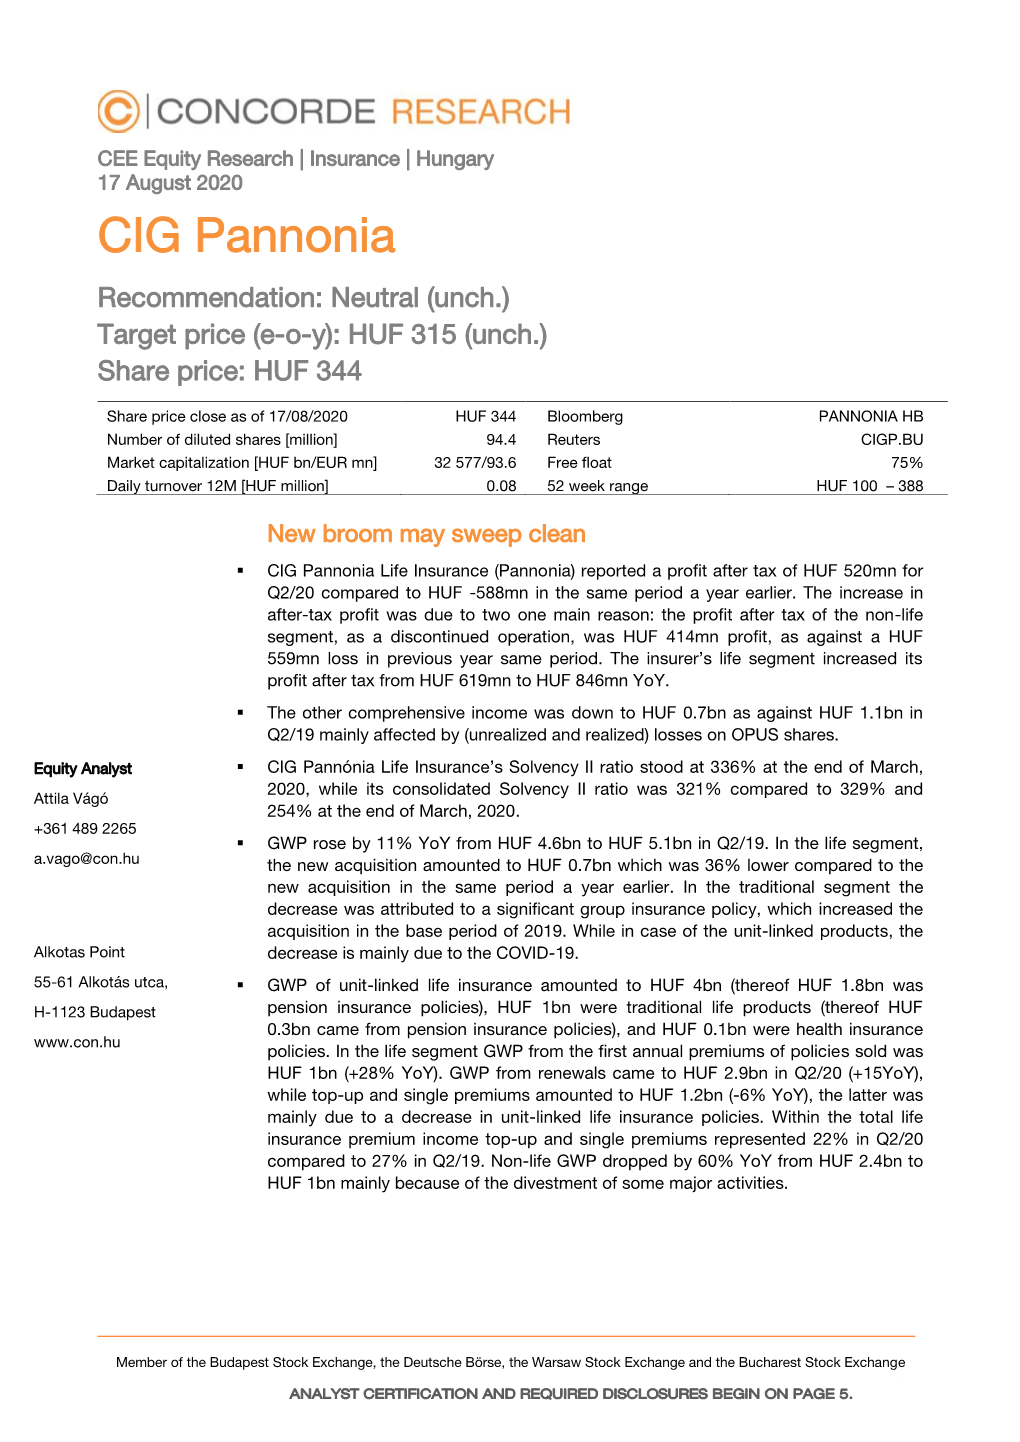 CIG Pannonia Recommendation: Neutral (Unch.) Target Price (E-O-Y): HUF 315 (Unch.) Share Price: HUF 344